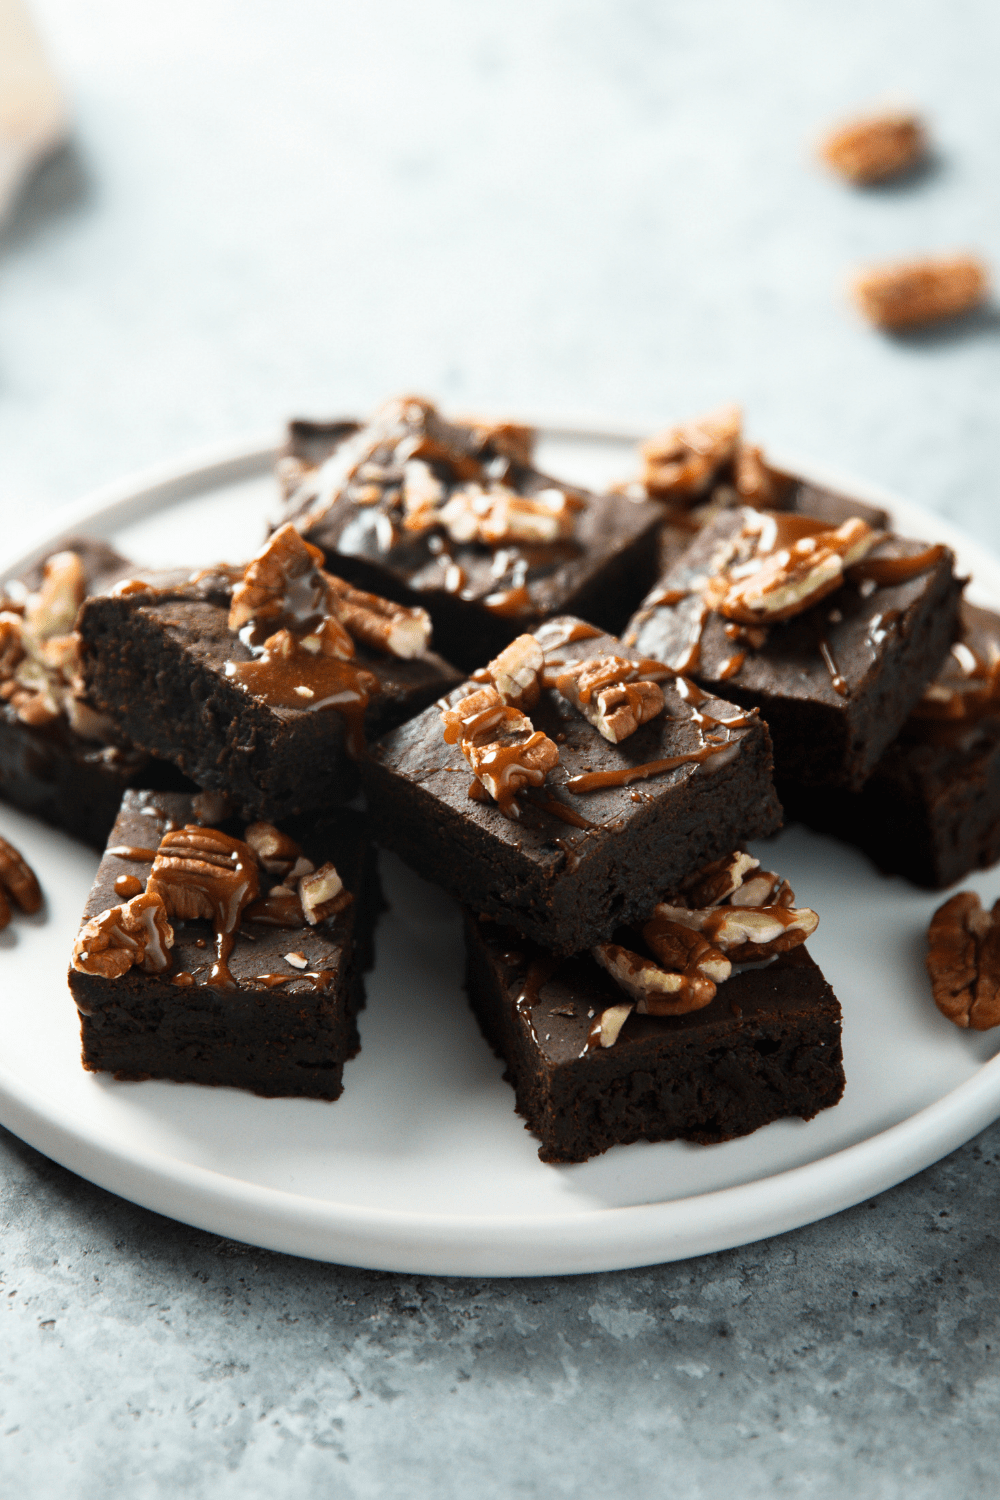 Sweet Homemade Fudge Brownies with Walnuts in a White Plate